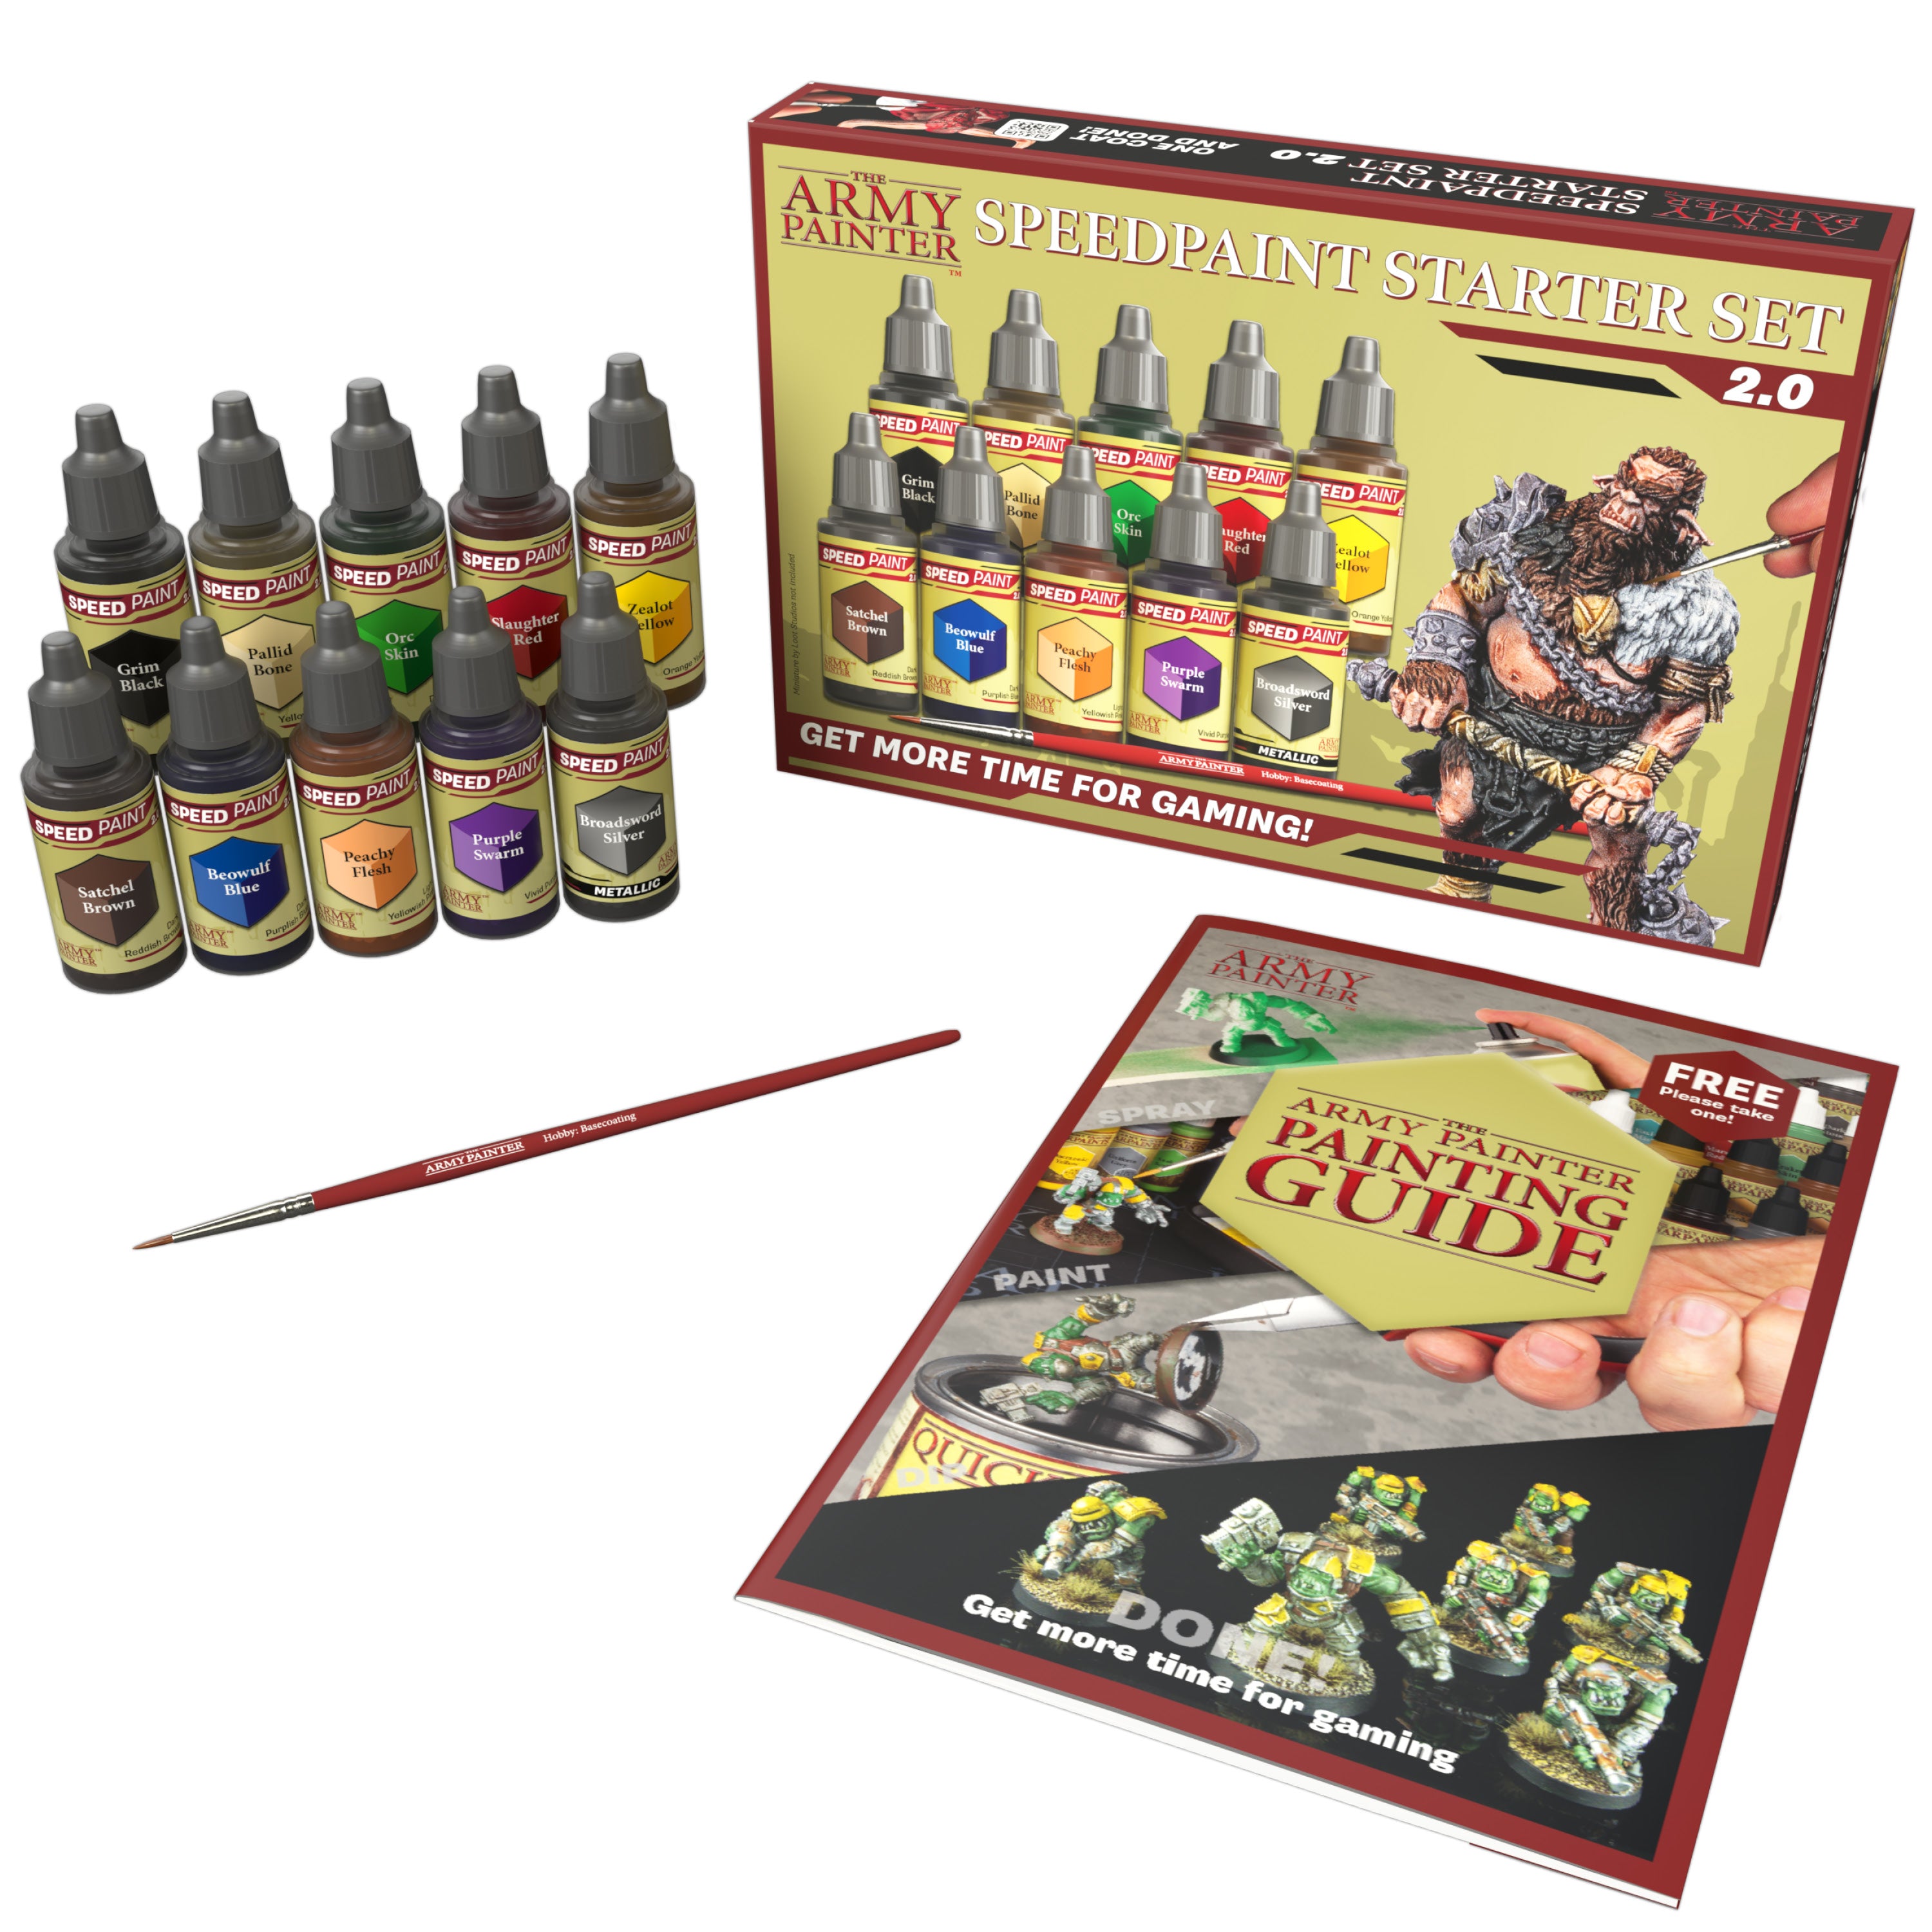 The Army Painter Has New Miniature Painting Guides!